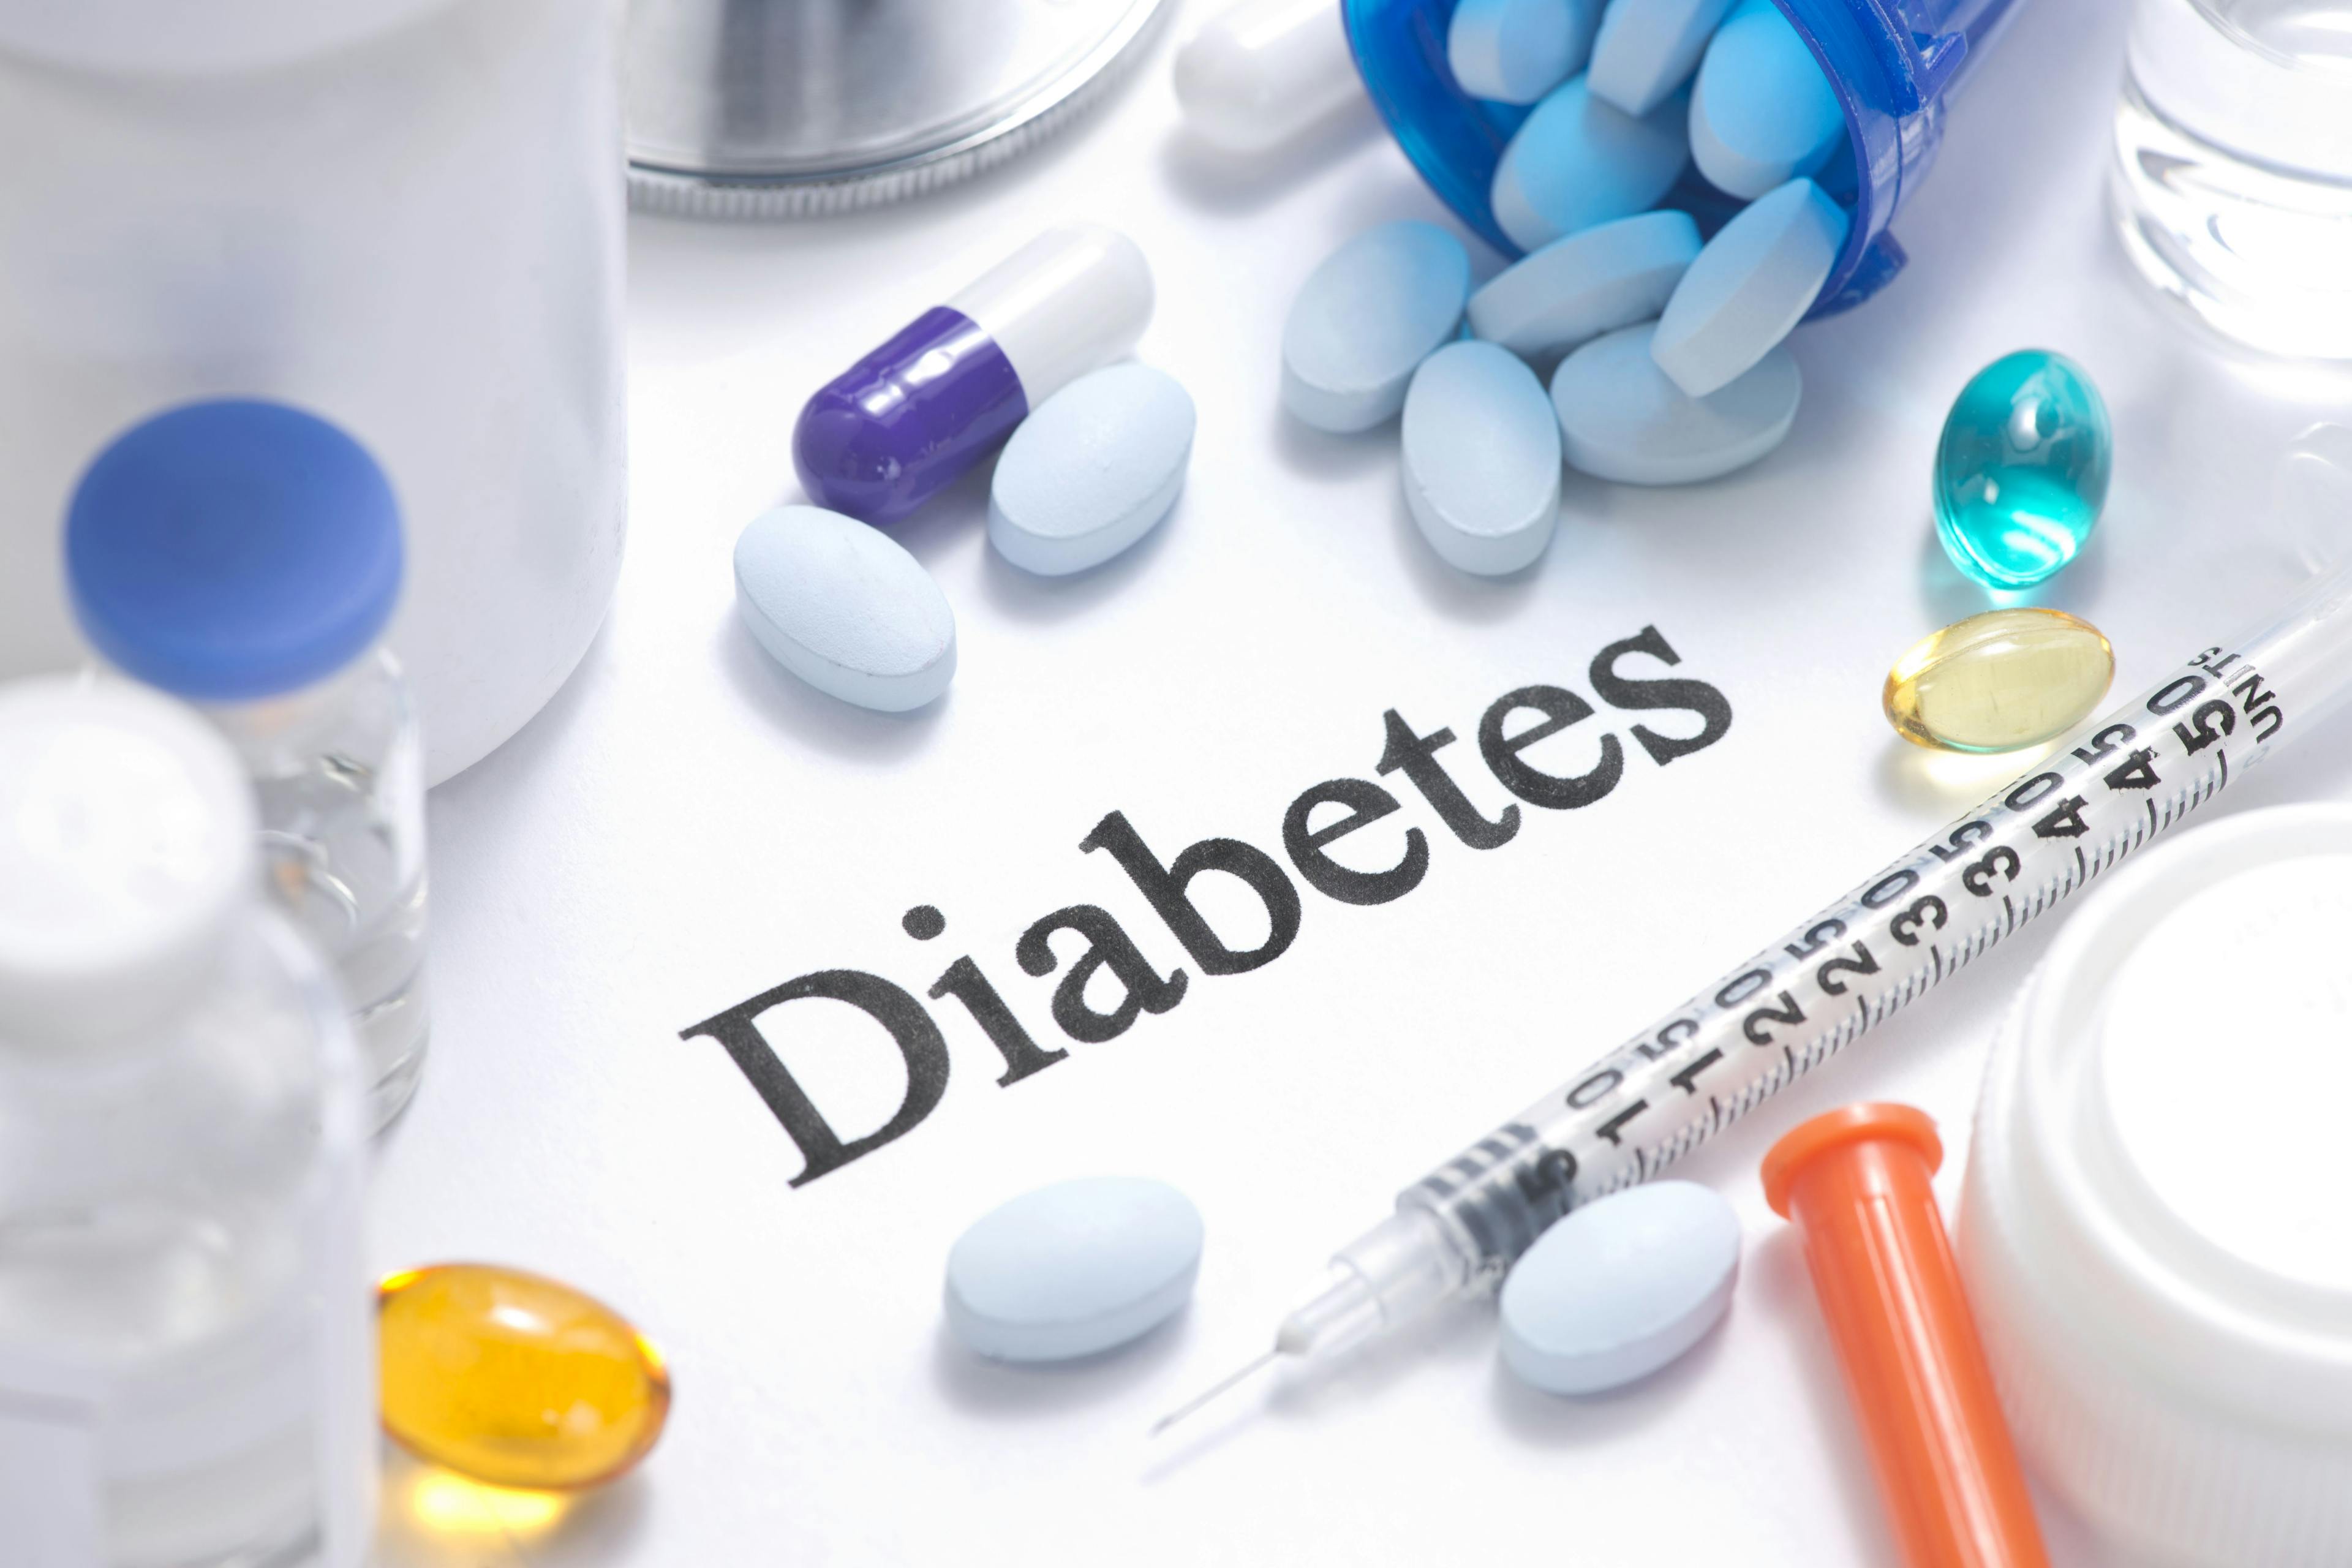 Stock imagery of diabetes related items. | Credit: Fotolia